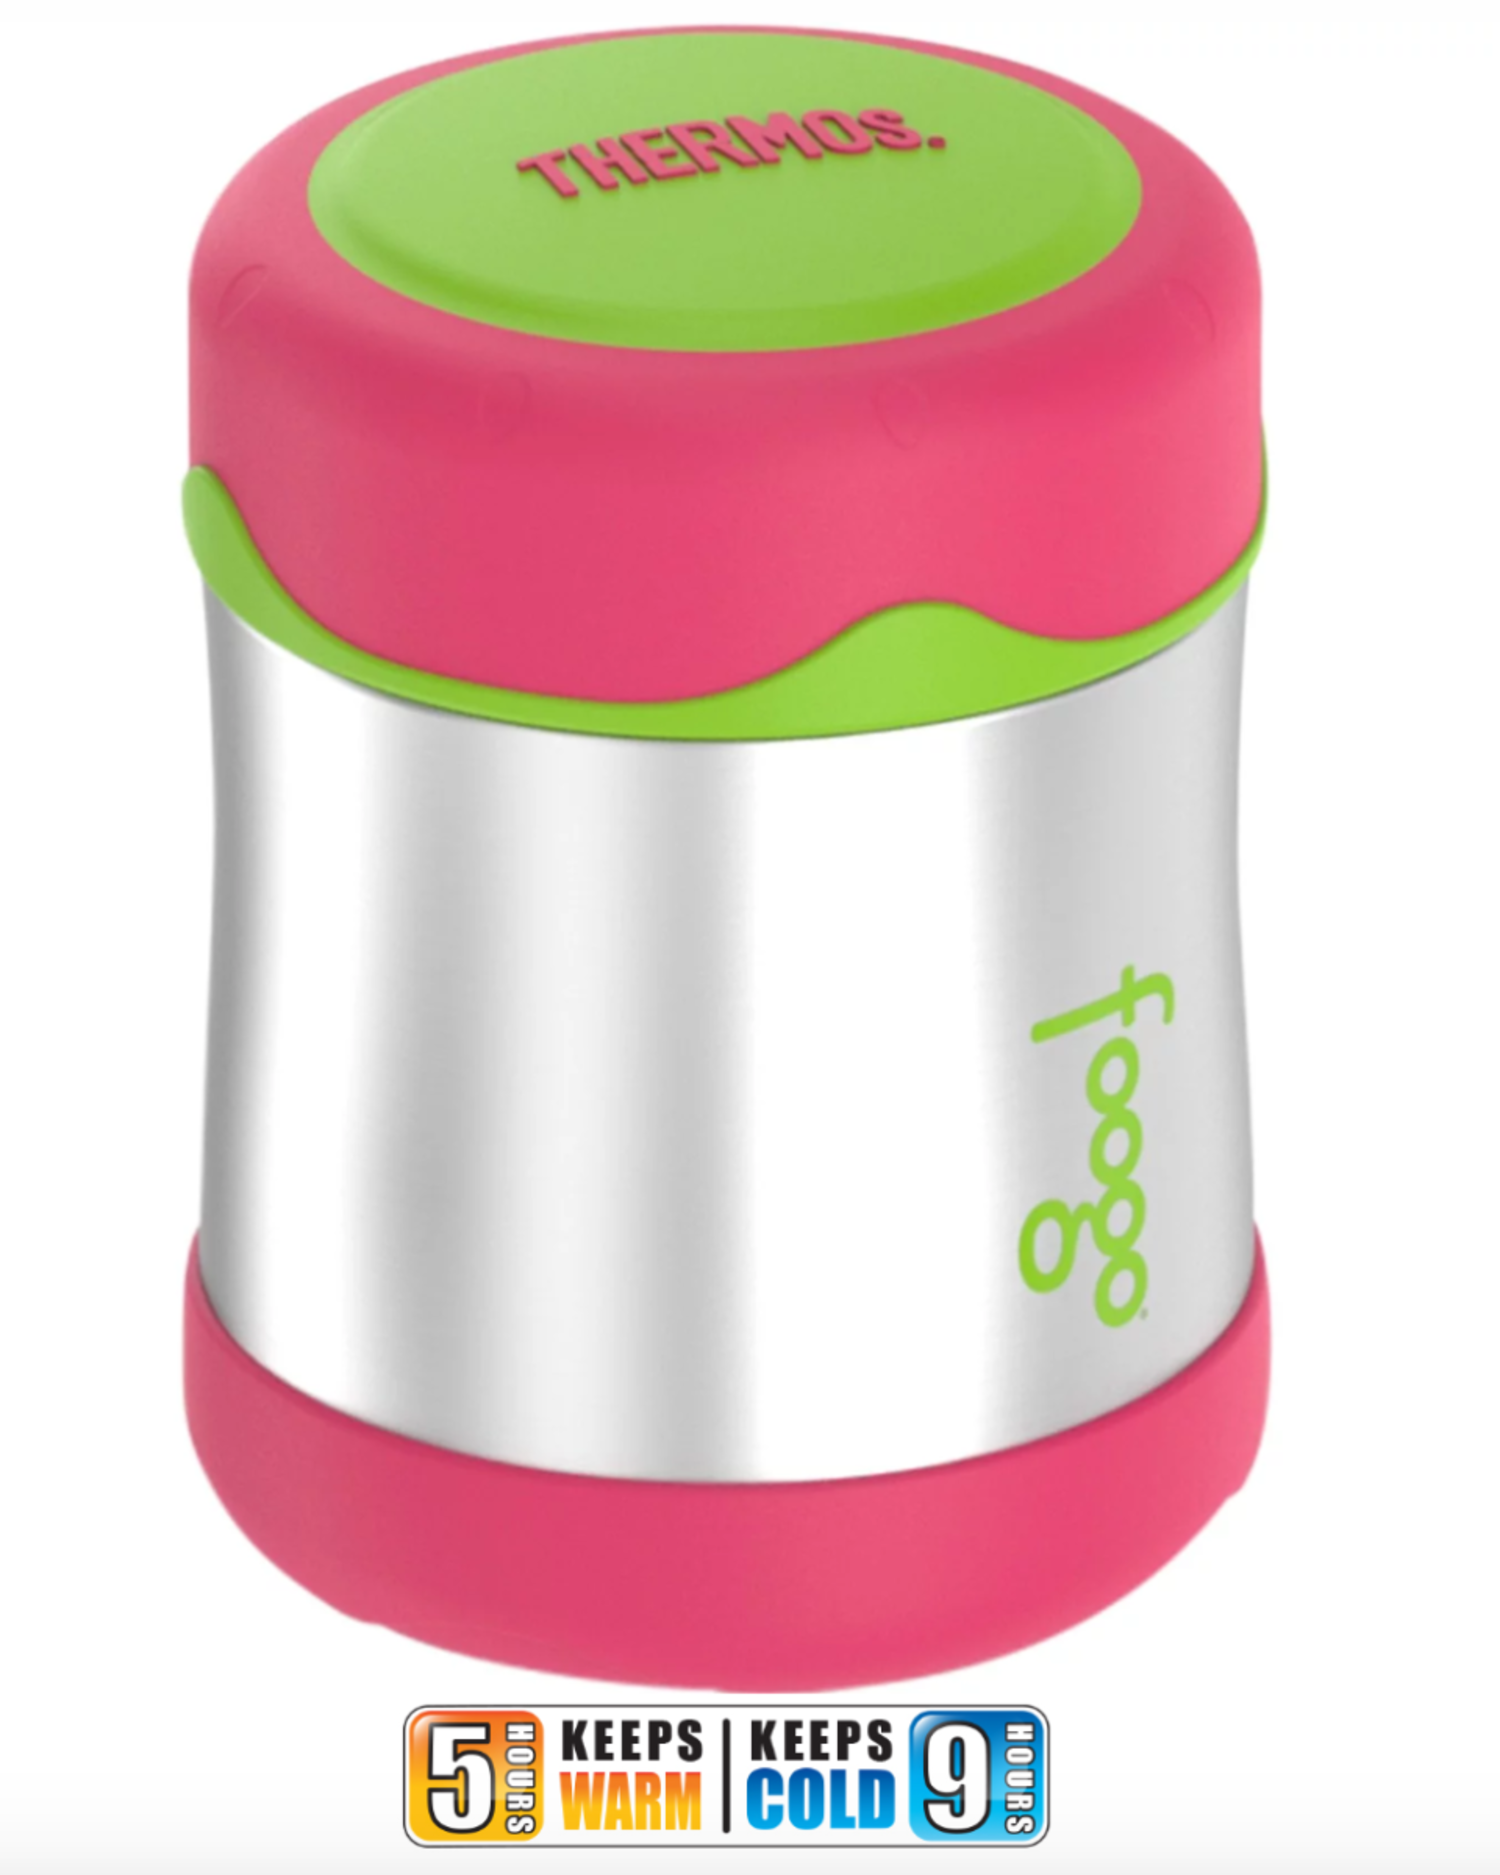 Thermos 10 oz. Stainless Steel Insulated Food Jar with Spoon - Pink